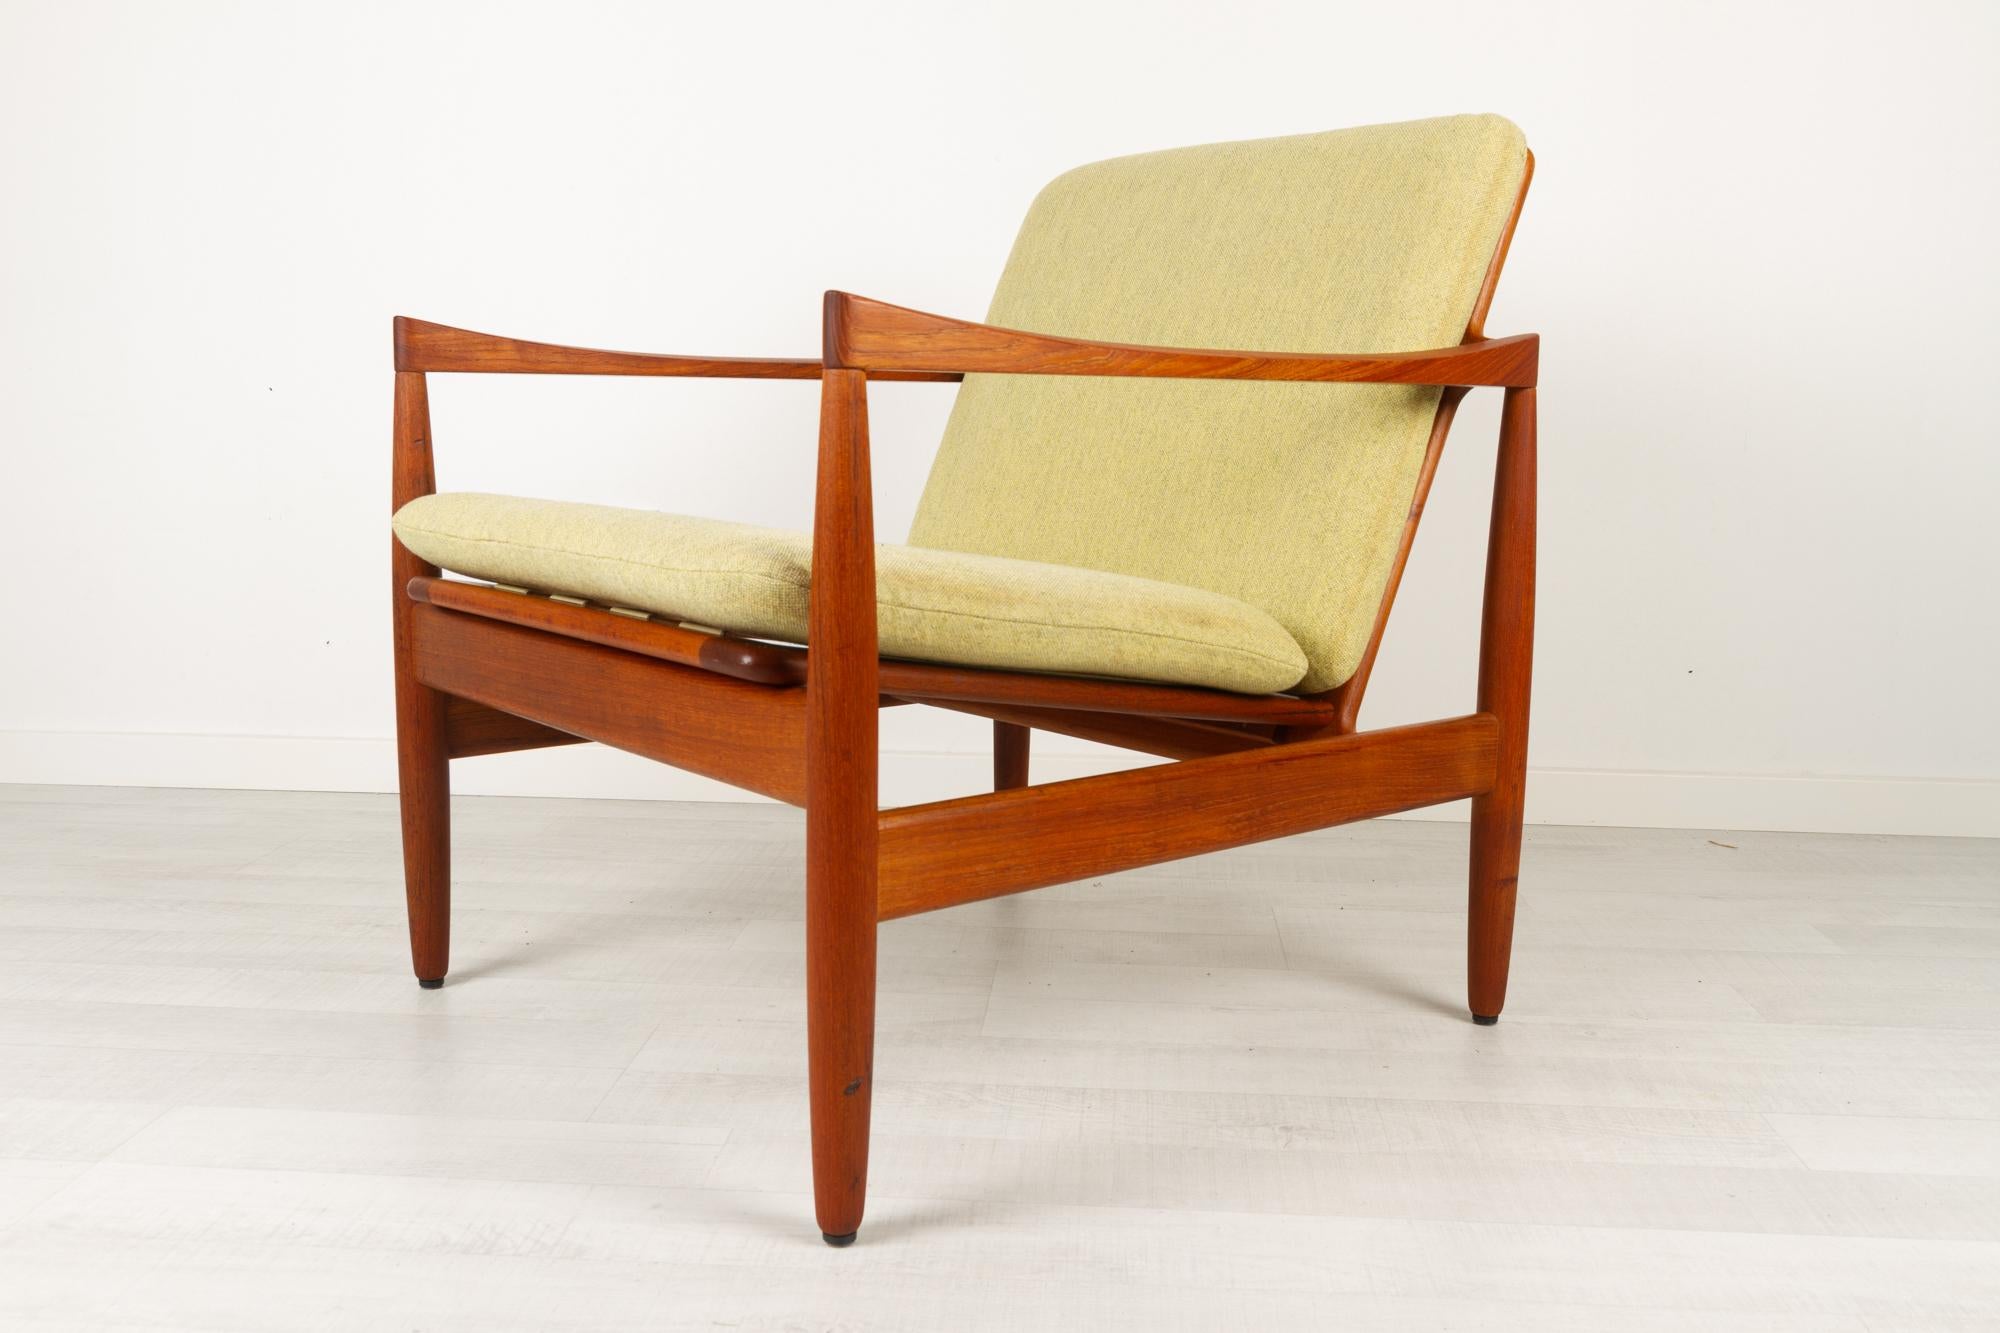 Vintage Danish teak easy chair by Skive Møbelfabrik 1960s
Elegant Danish Mid-Century Modern lounge chair by Danish manufacturer Skive Møbelfabrik. The designer of this chair is unknown but it has previously been attributed Kai Kristiansen and Arne